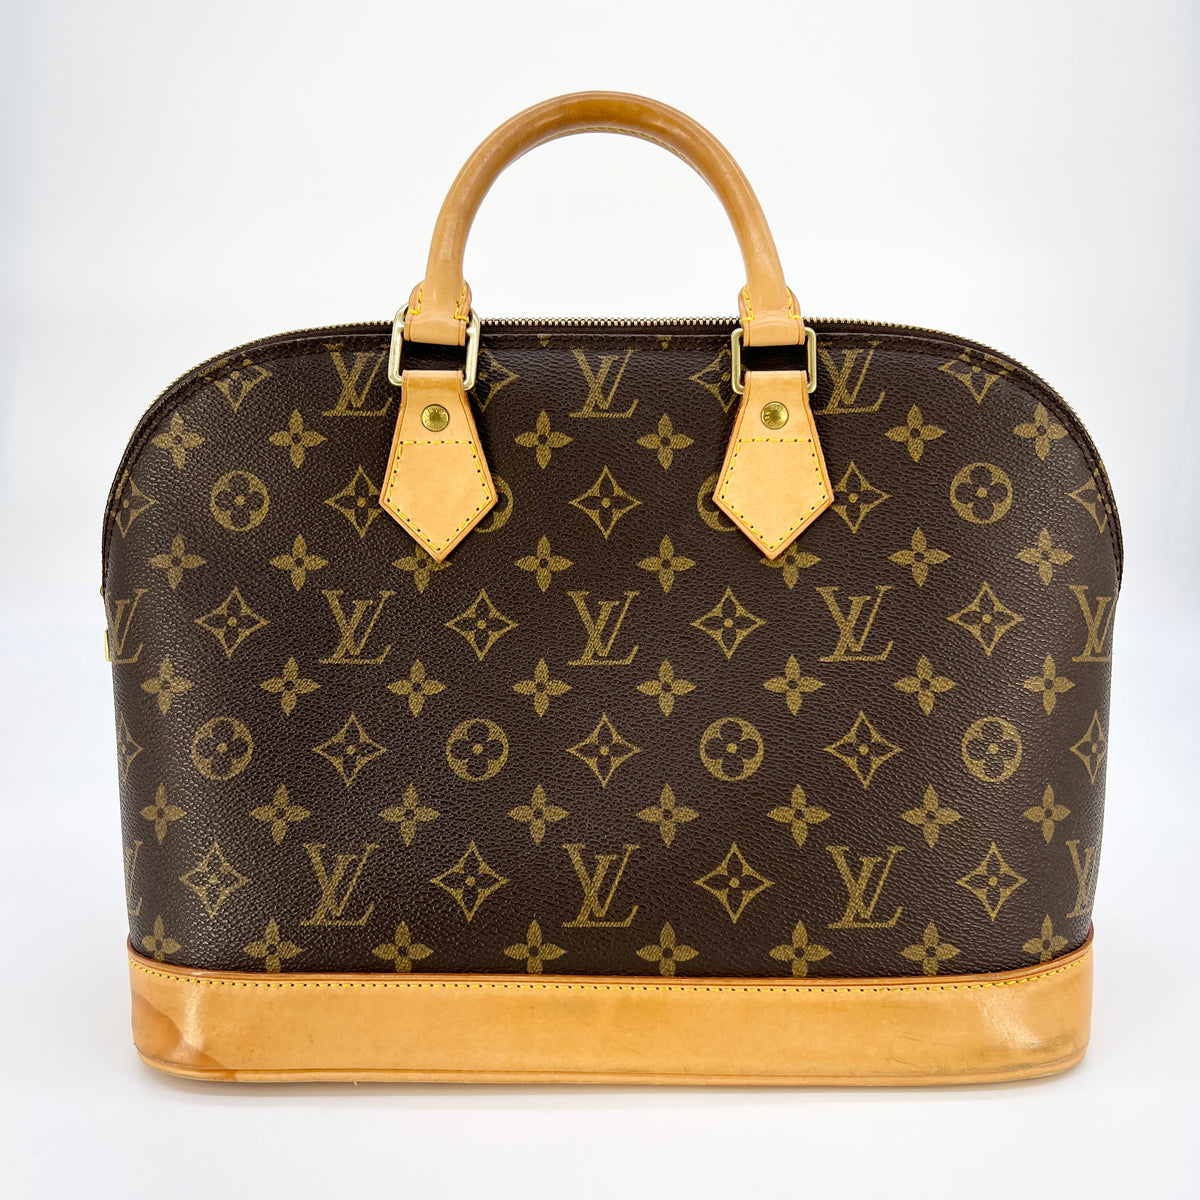 Louis Vuitton Colorful Bags & Handbags for Women, Authenticity Guaranteed